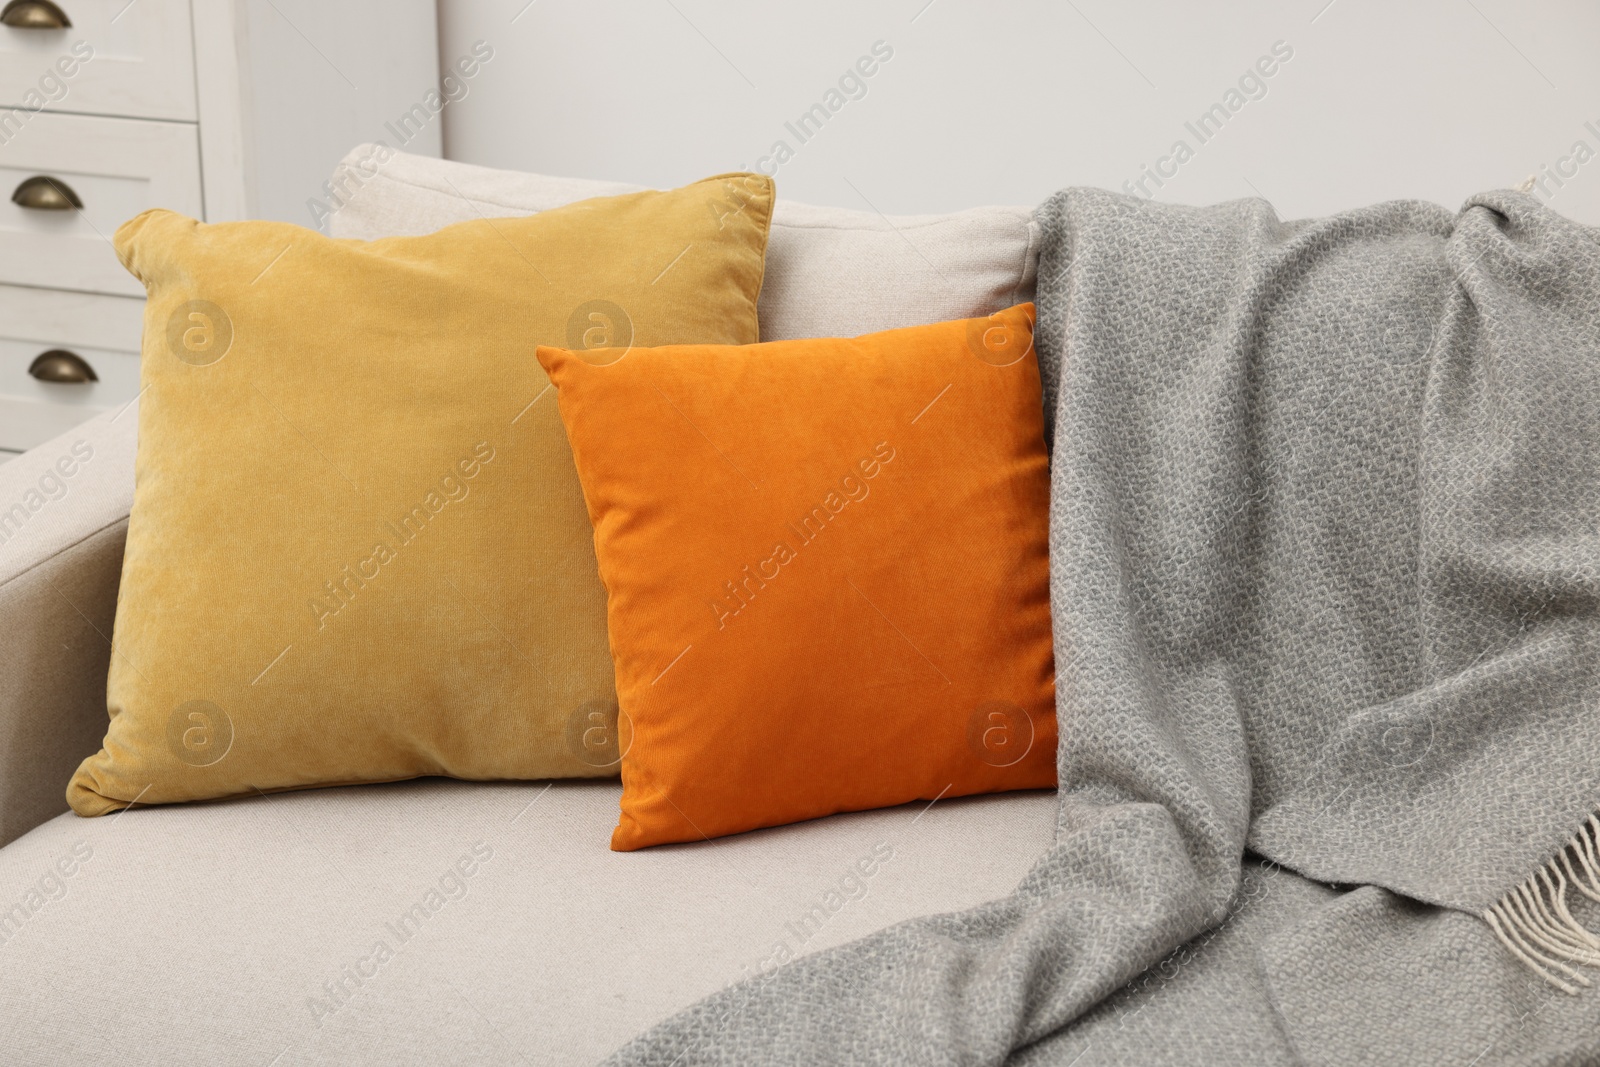 Photo of Soft pillows and blanket on sofa indoors